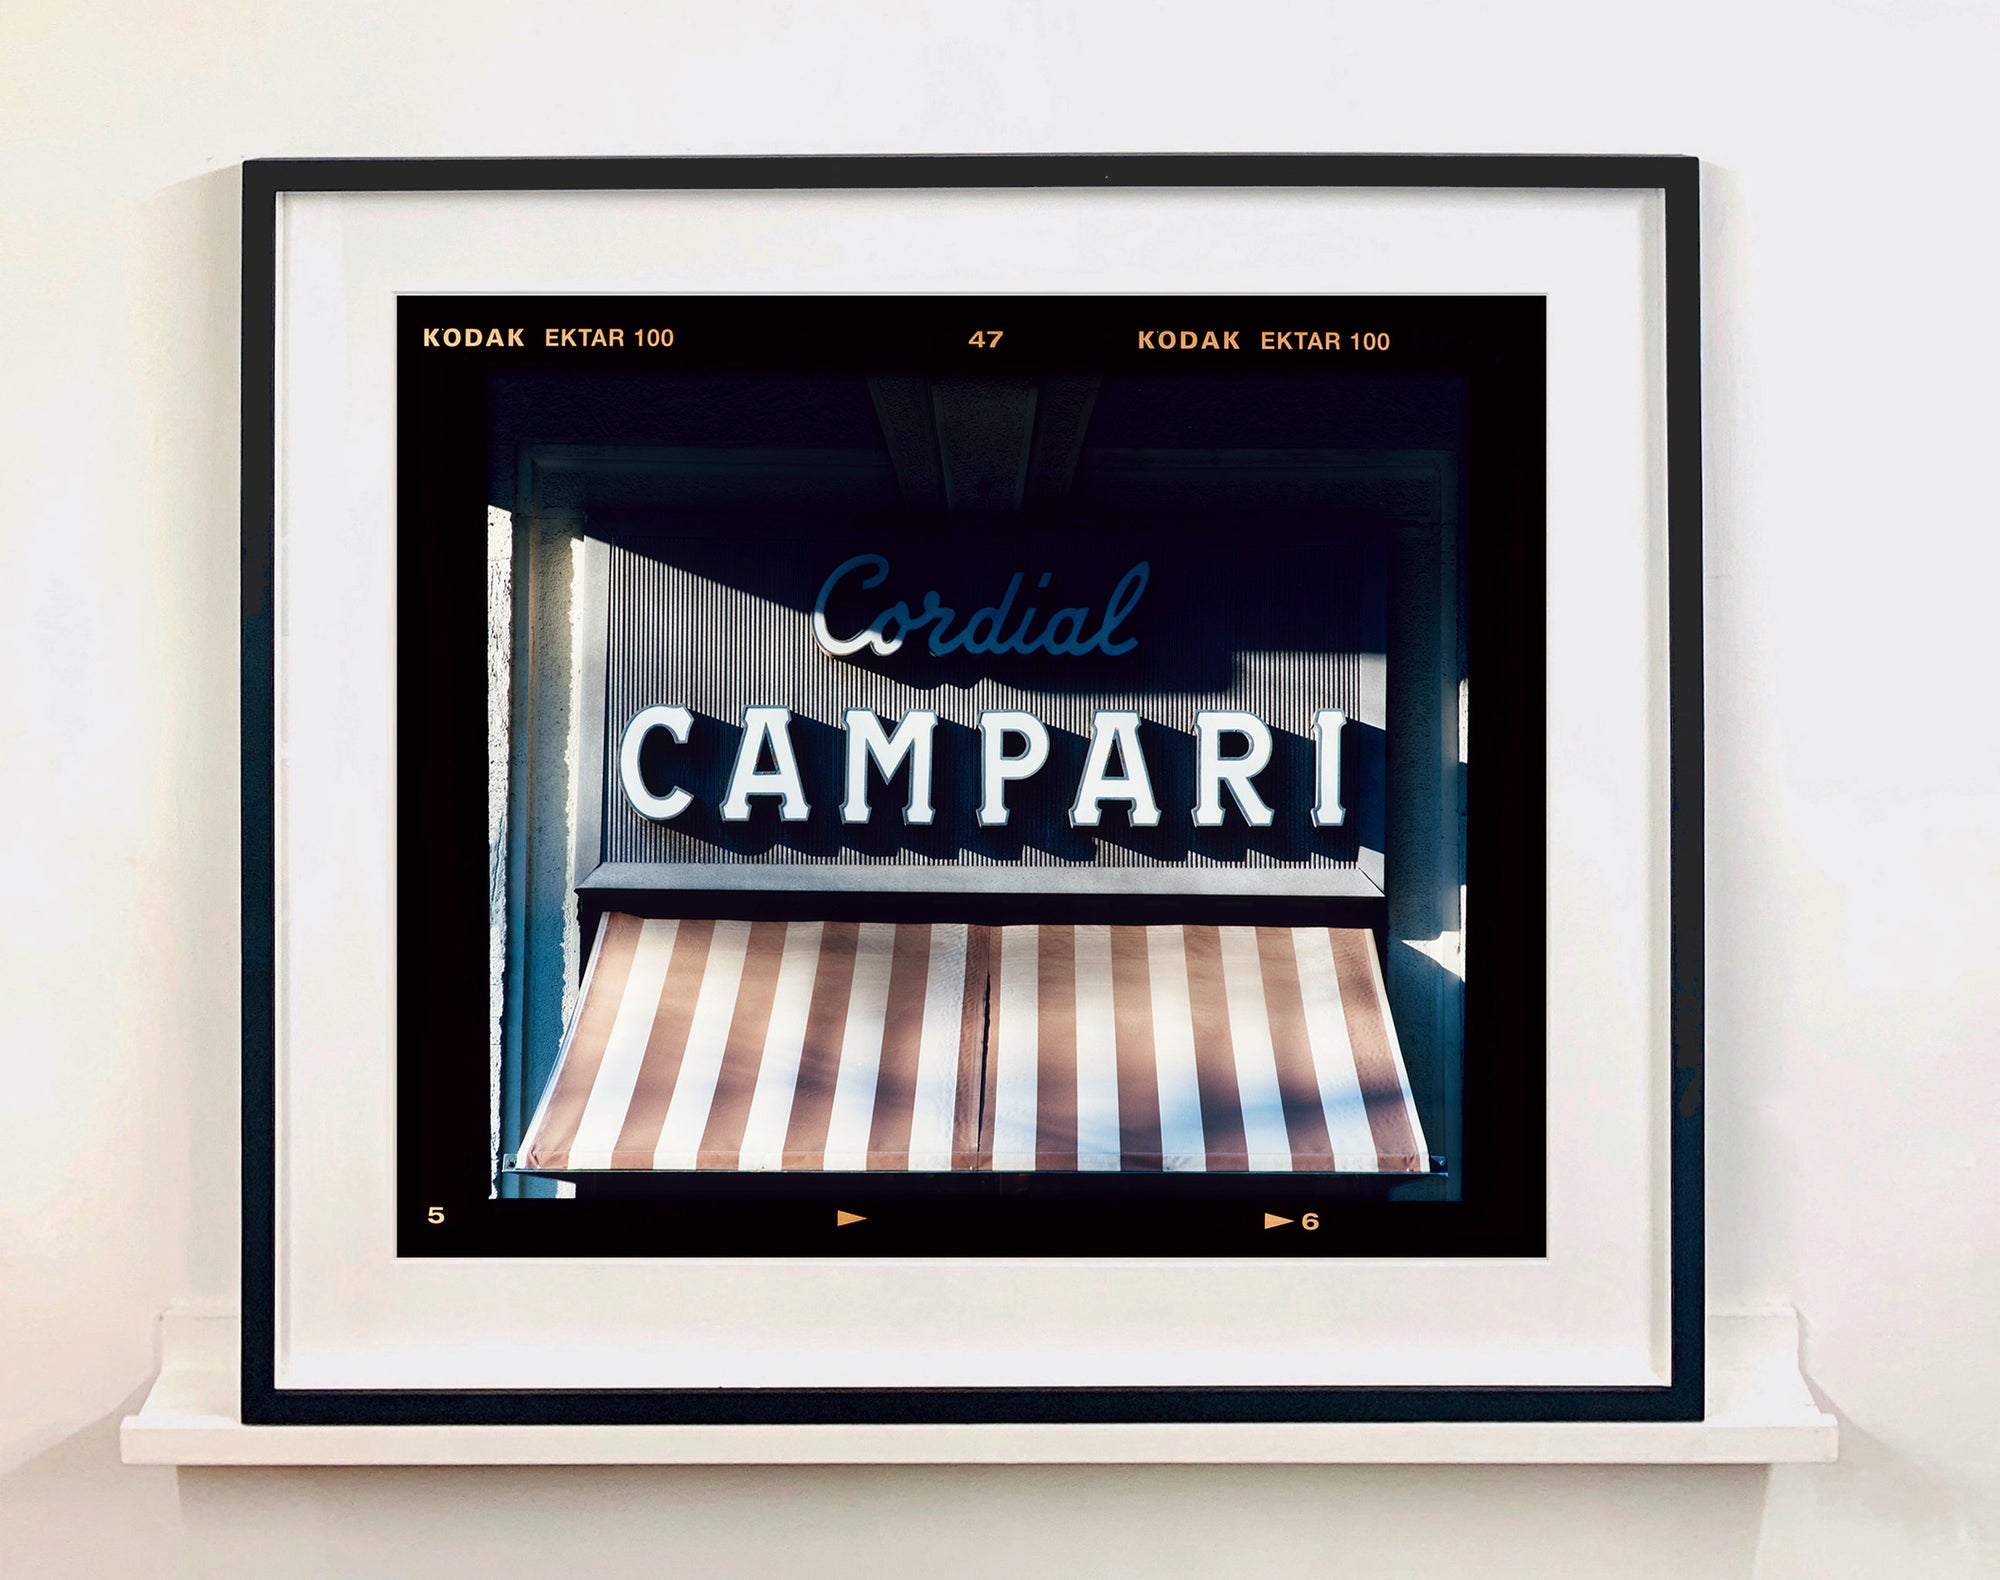 Cordial Campari, photographed as part of Richard Heeps’ series 'A Short History of Milan’ features typography above the striped awning of a fascist building. 